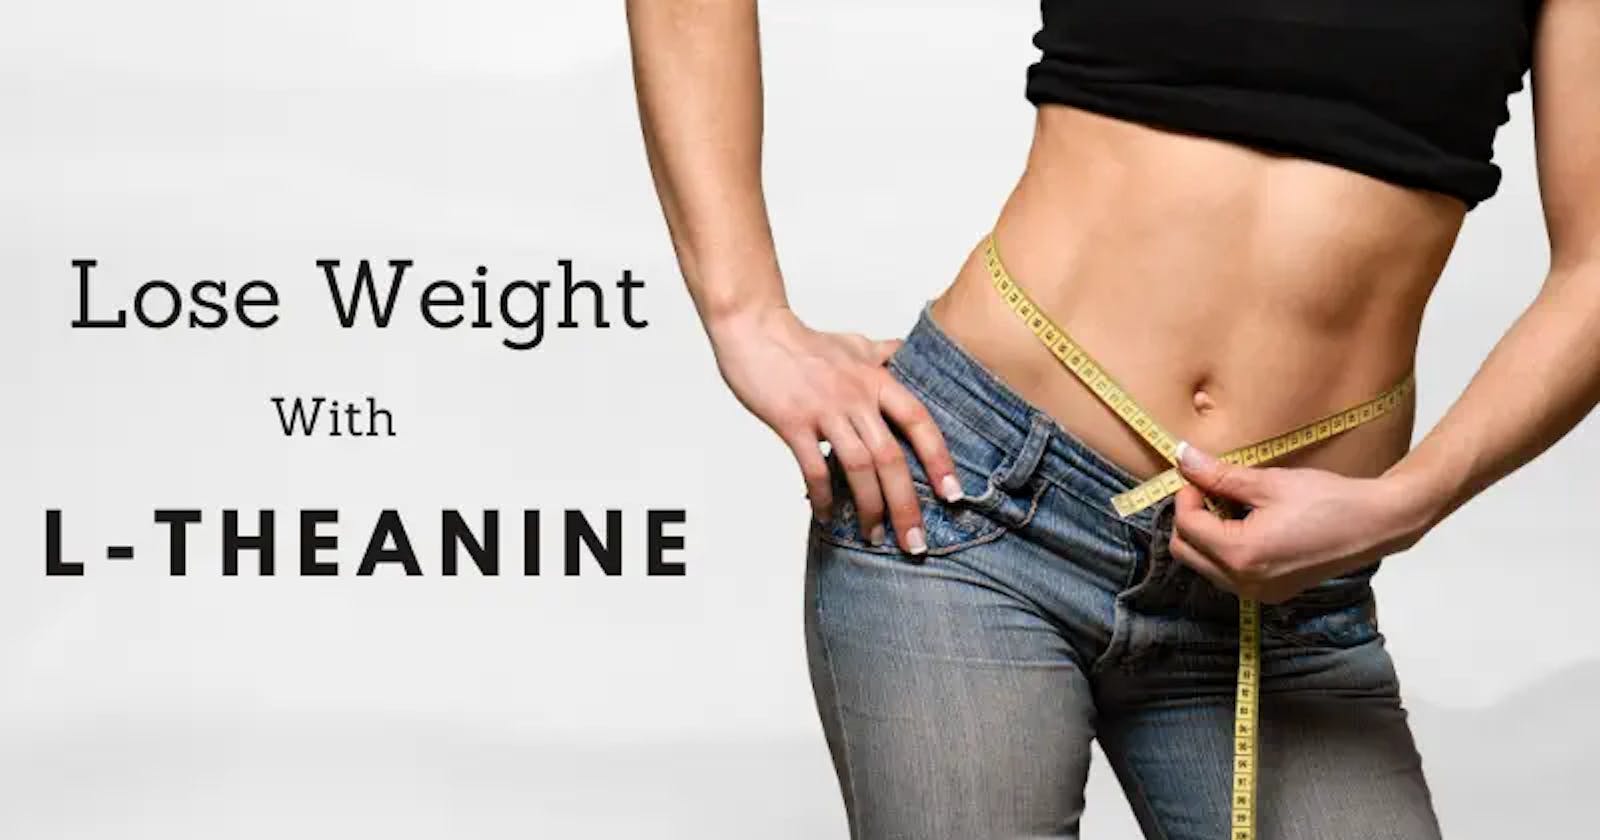 4 Effective Benefits of Using L-Theanine For Weight Loss